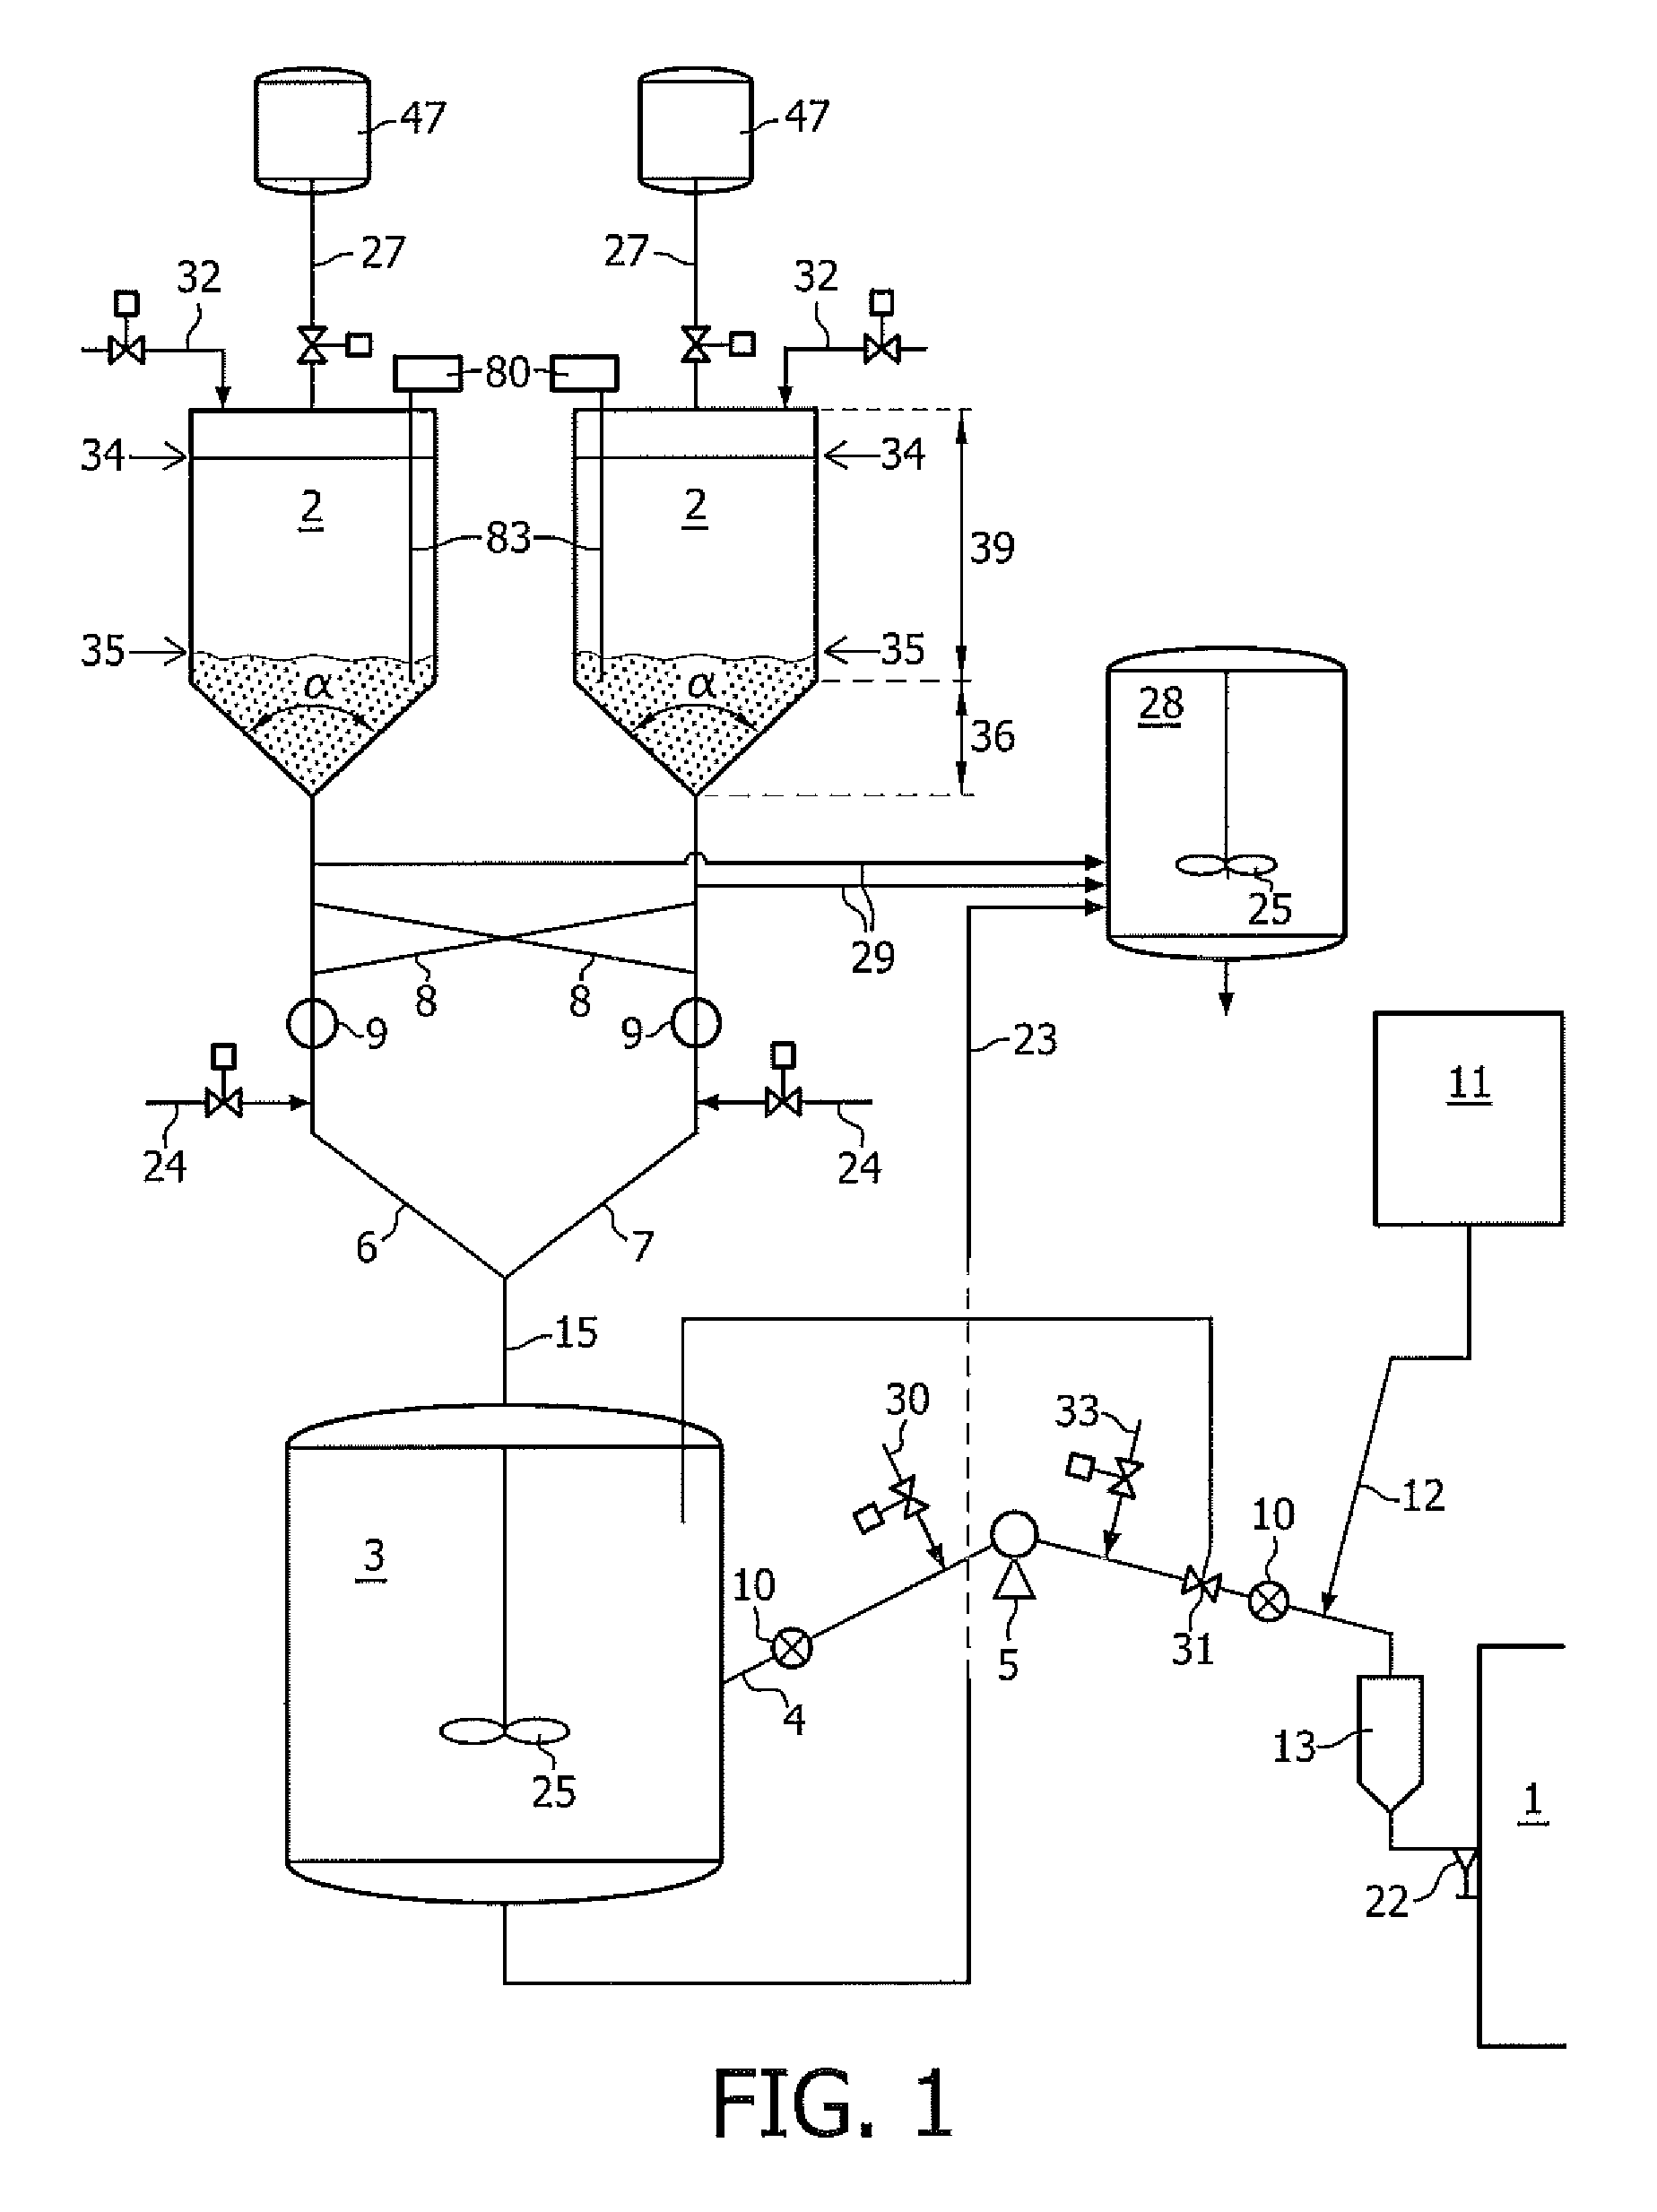 Method for replacing incompatible ethylene polymerization catalysts